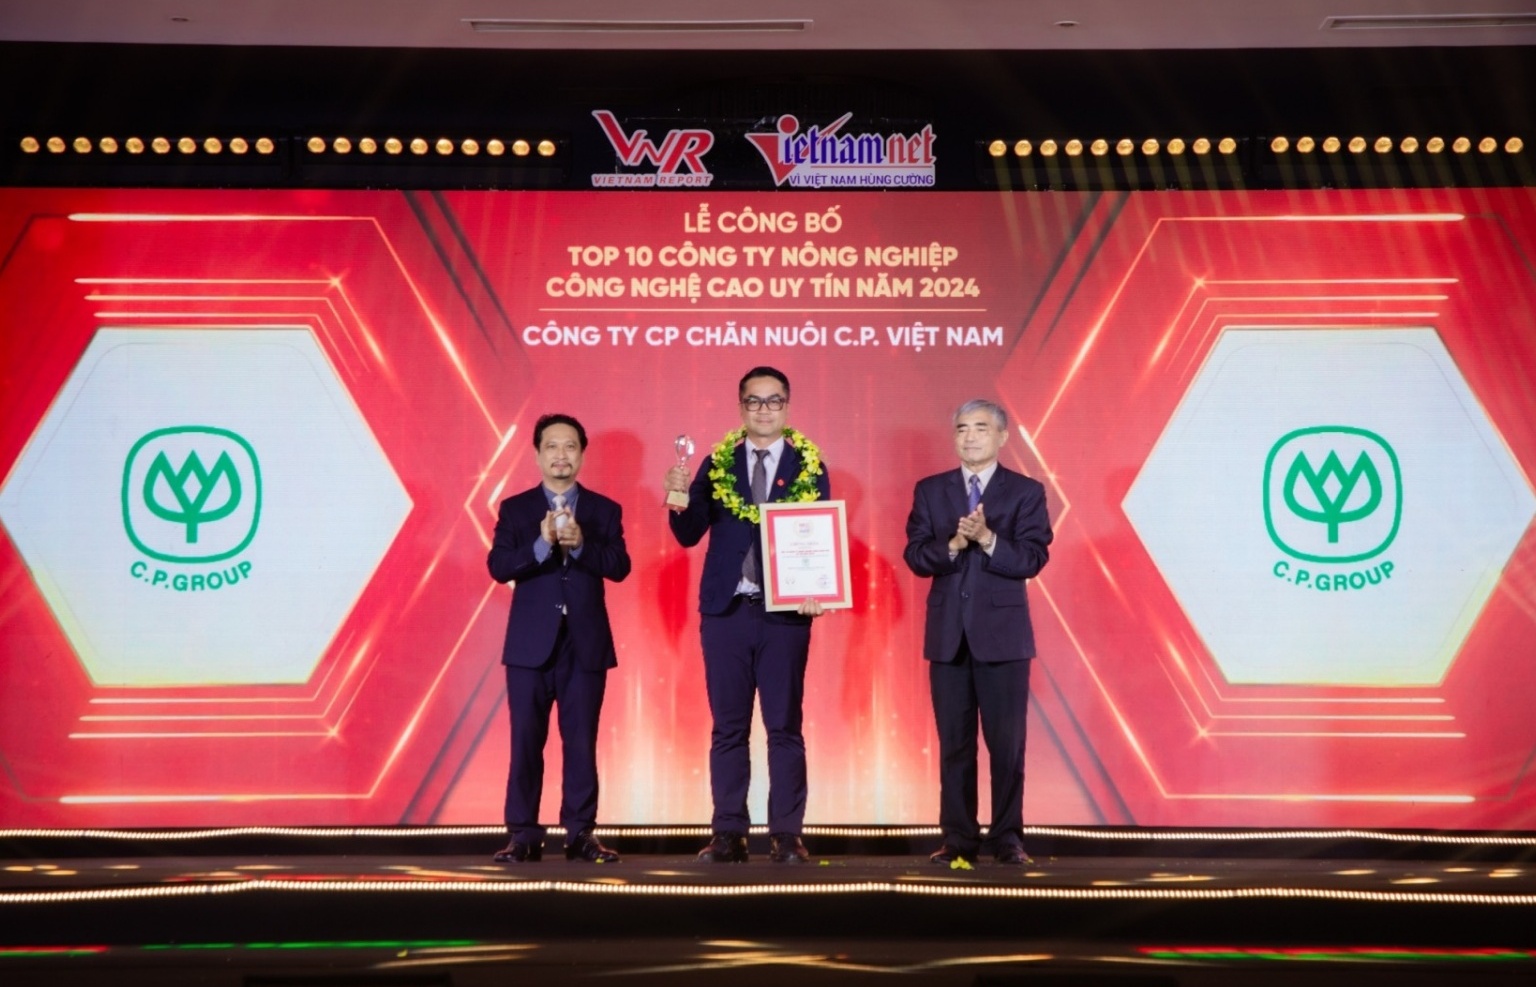 C.P. Vietnam praised for work in high-tech agriculture